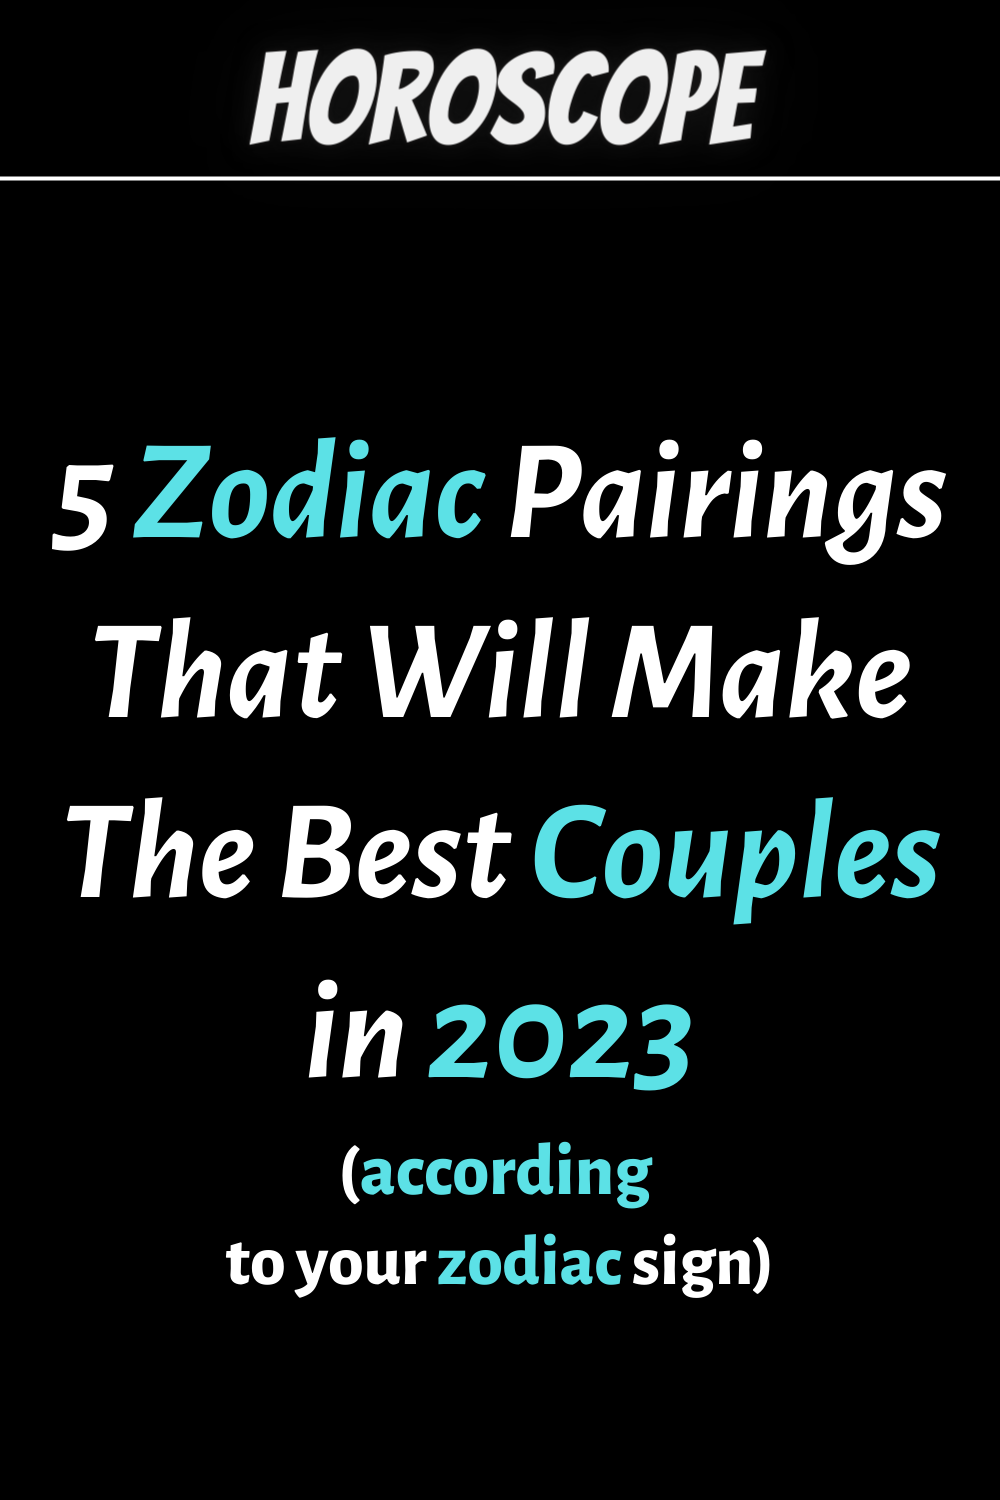 5 Zodiac Pairings That Will Make The Best Couples in 2023